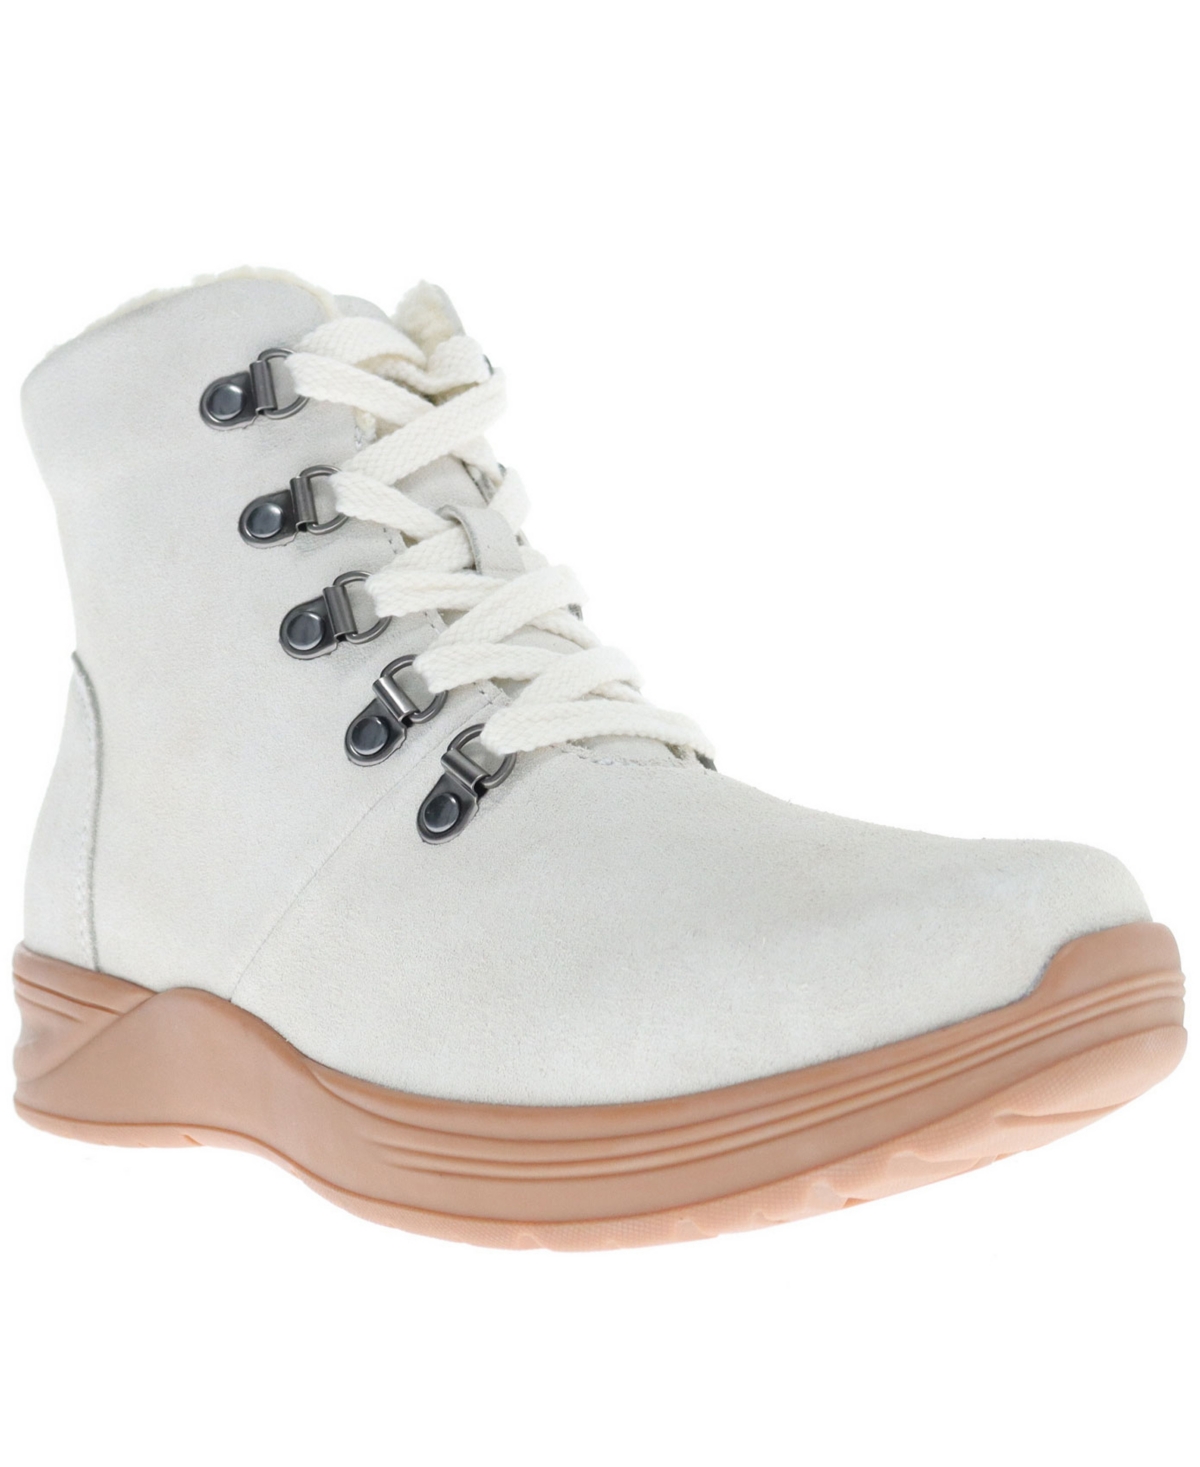 Women's Demi Suede Ankle Booties - White